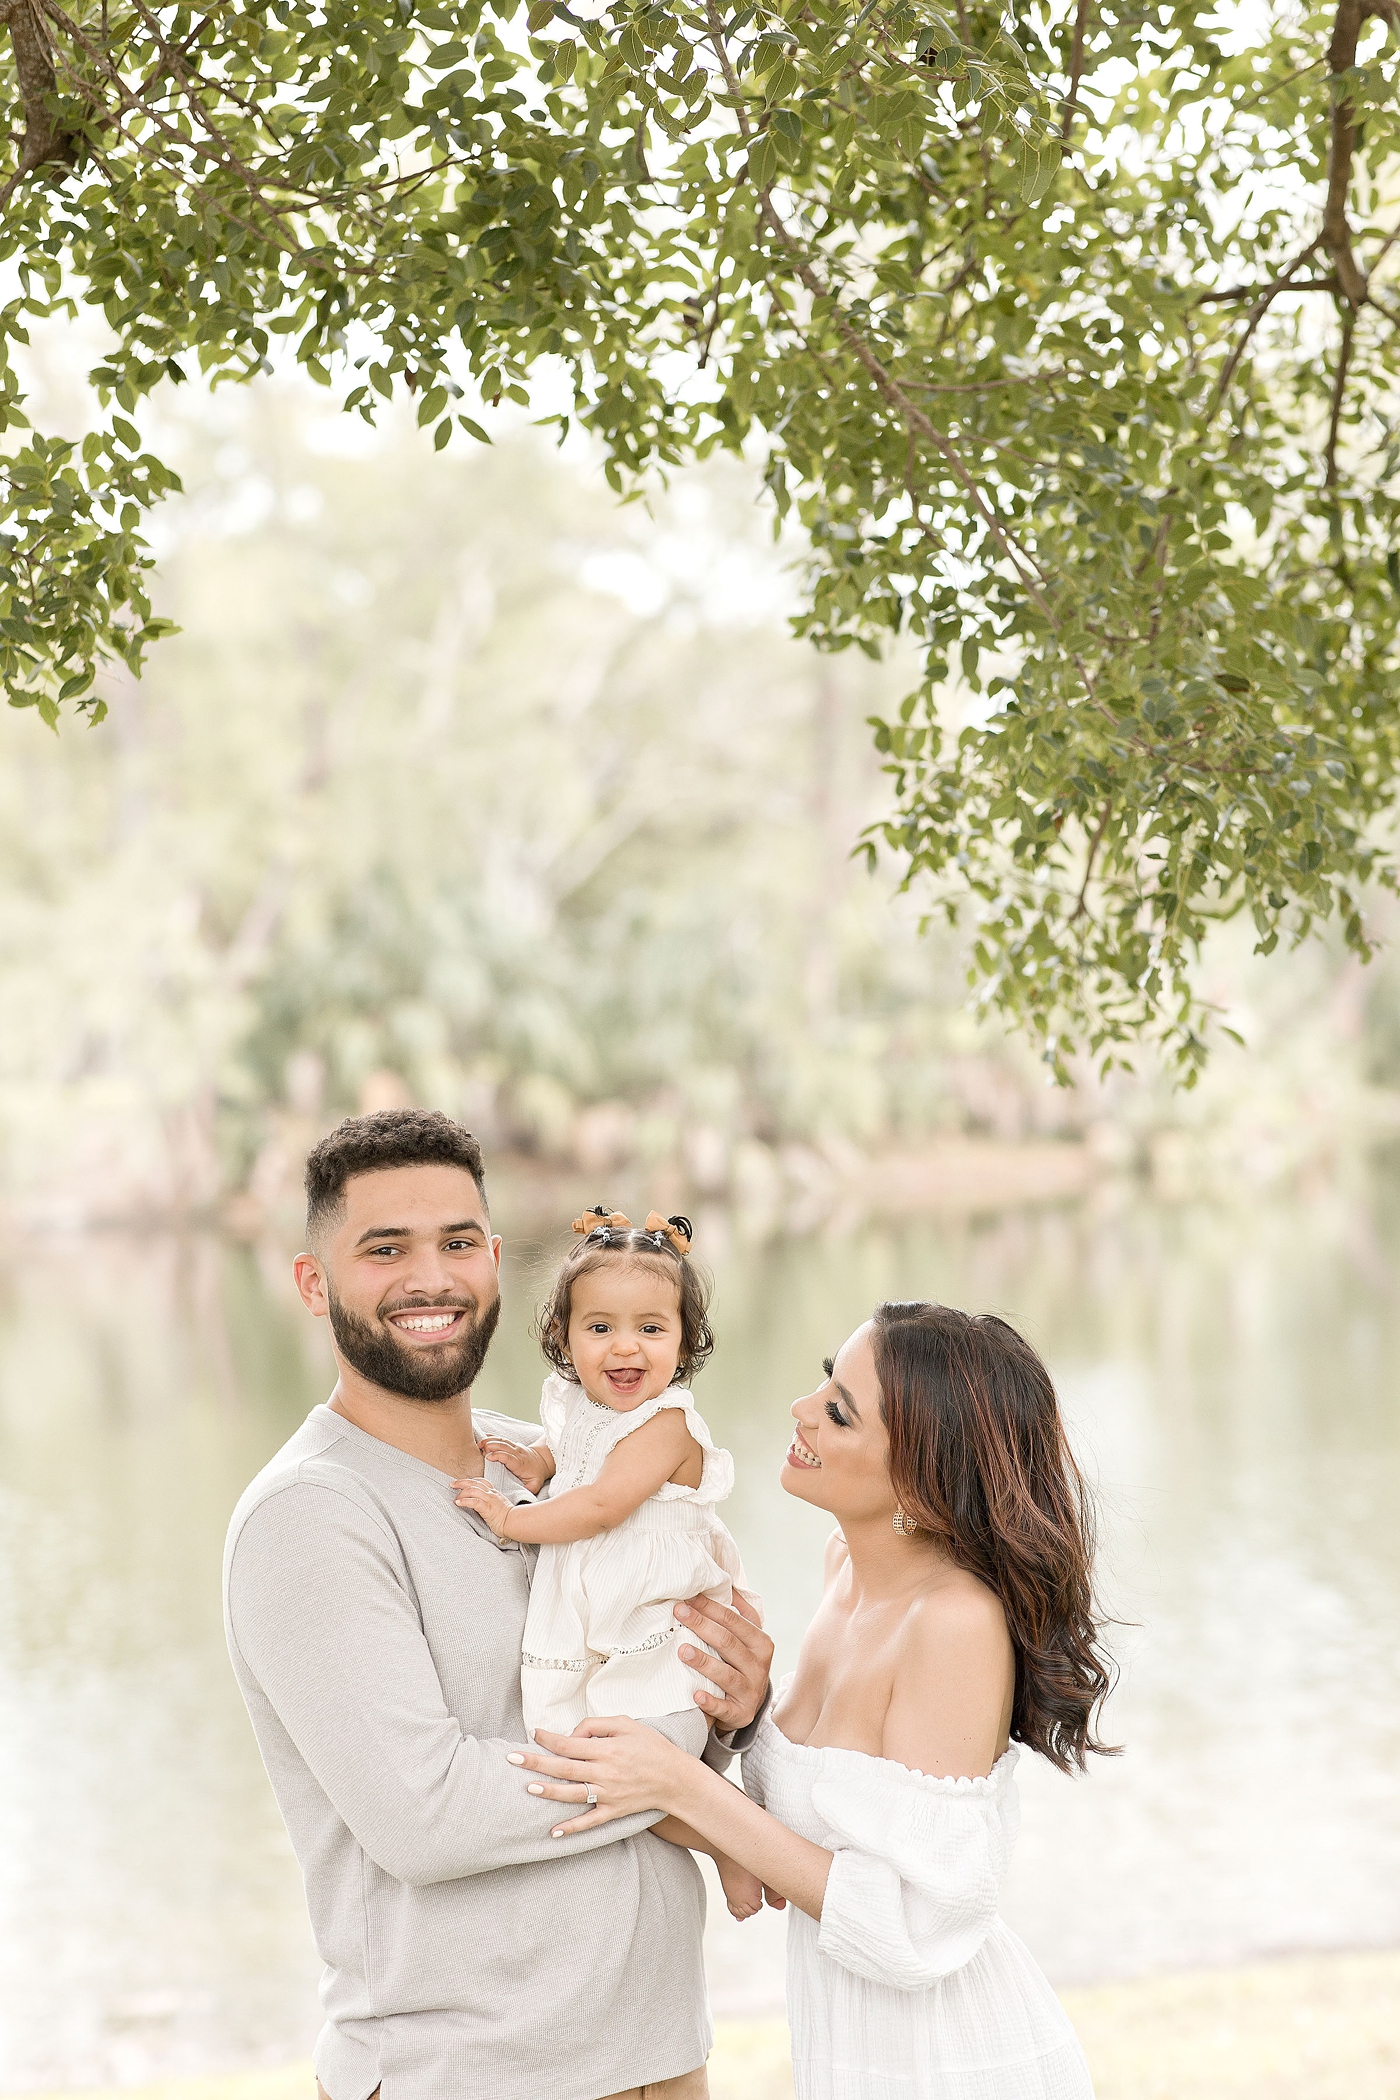 Dad and baby smile while mom lovingly looks at baby girl during baby photography miami session. Photo by Ivanna Vidal Photography.